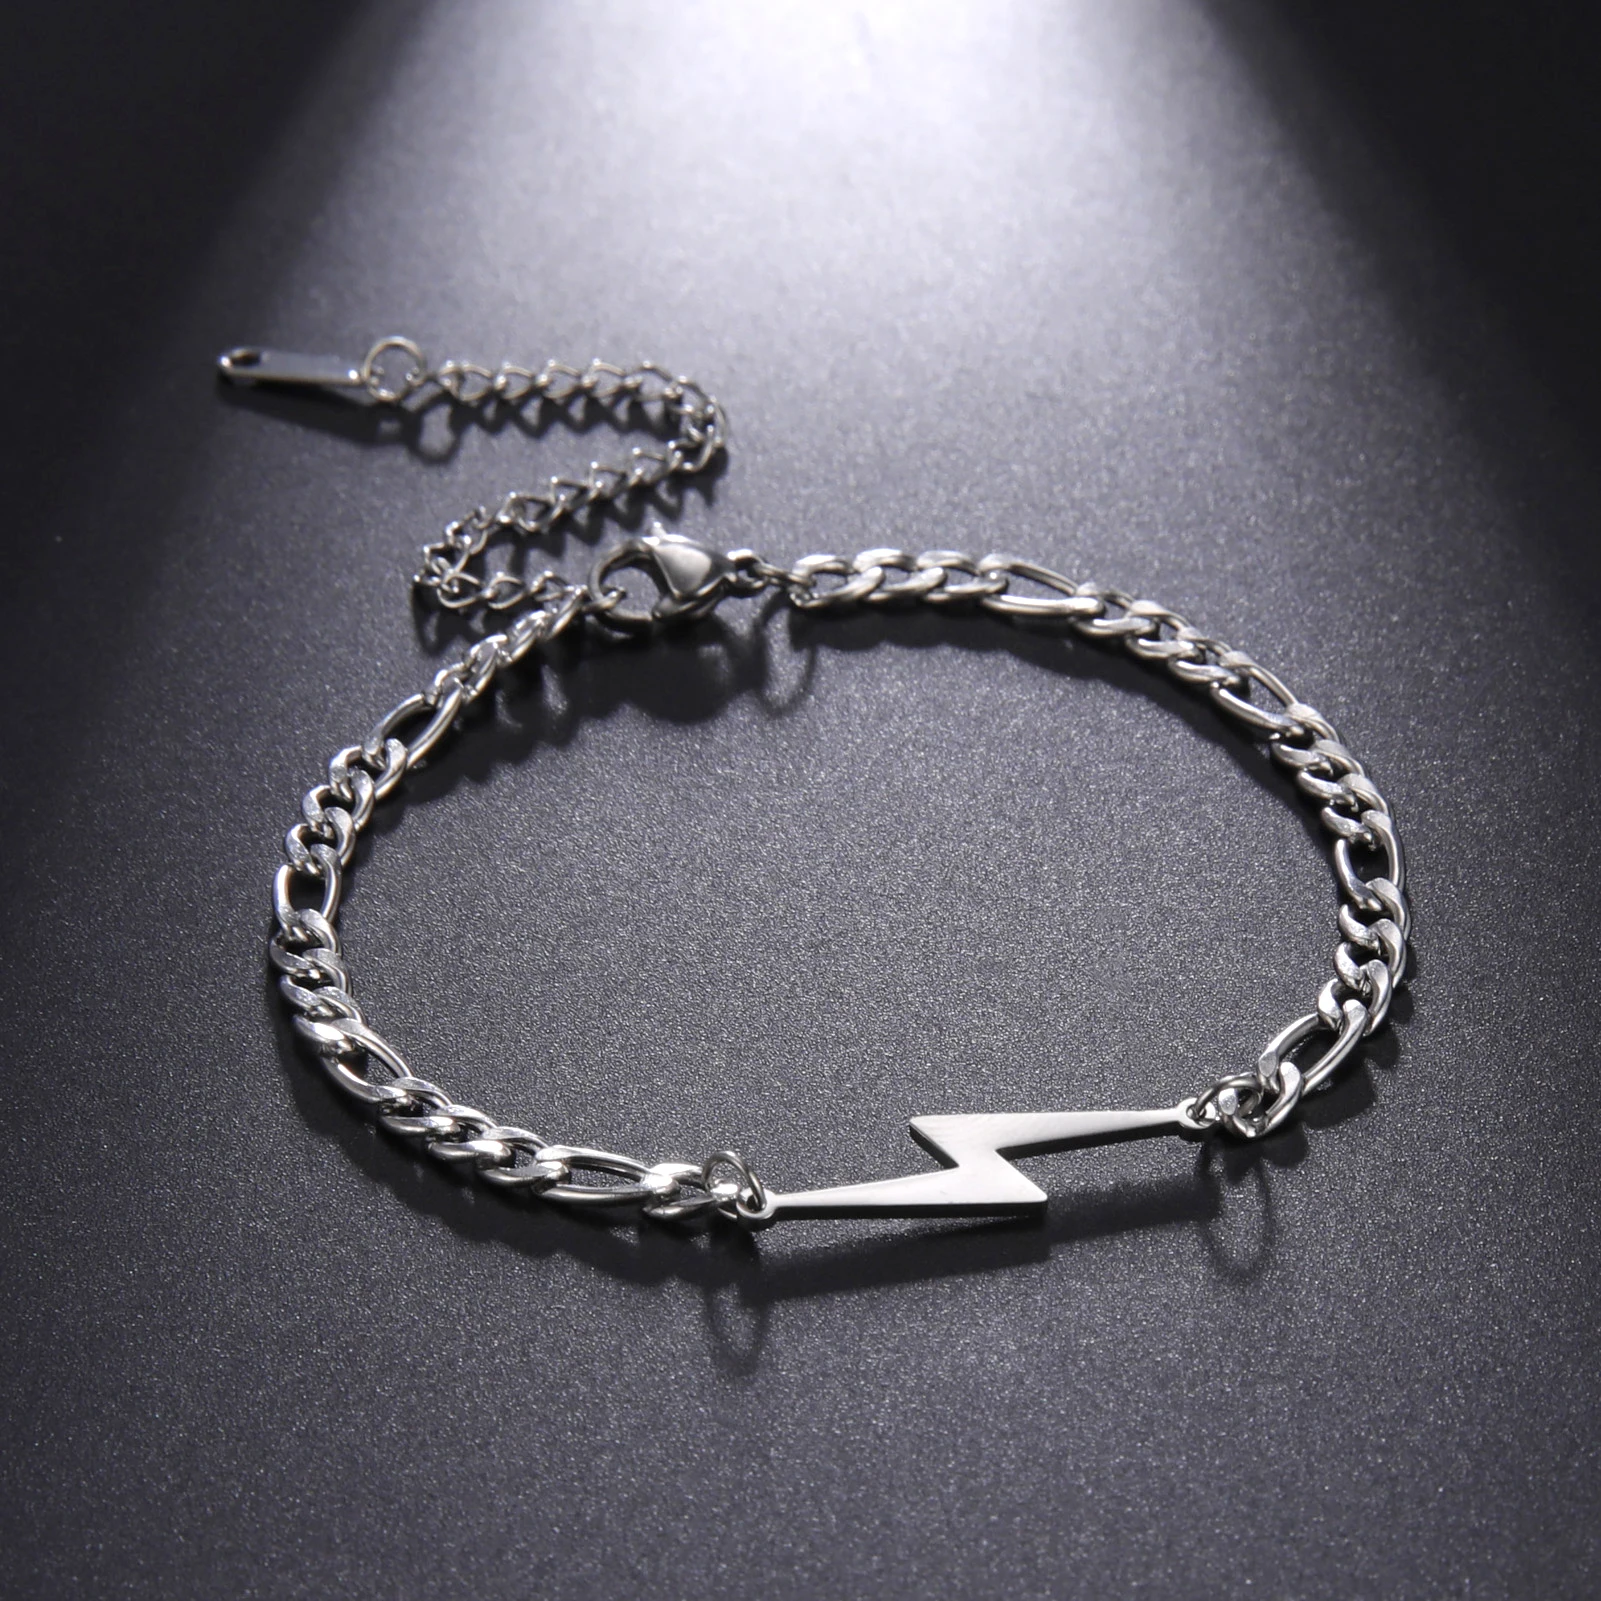 

Kkjoy Foot Chain of Women Men Silver Color Lightning Stainless Steel Anklet Simple Fashion Girls Birthday Jewelry Accessorie